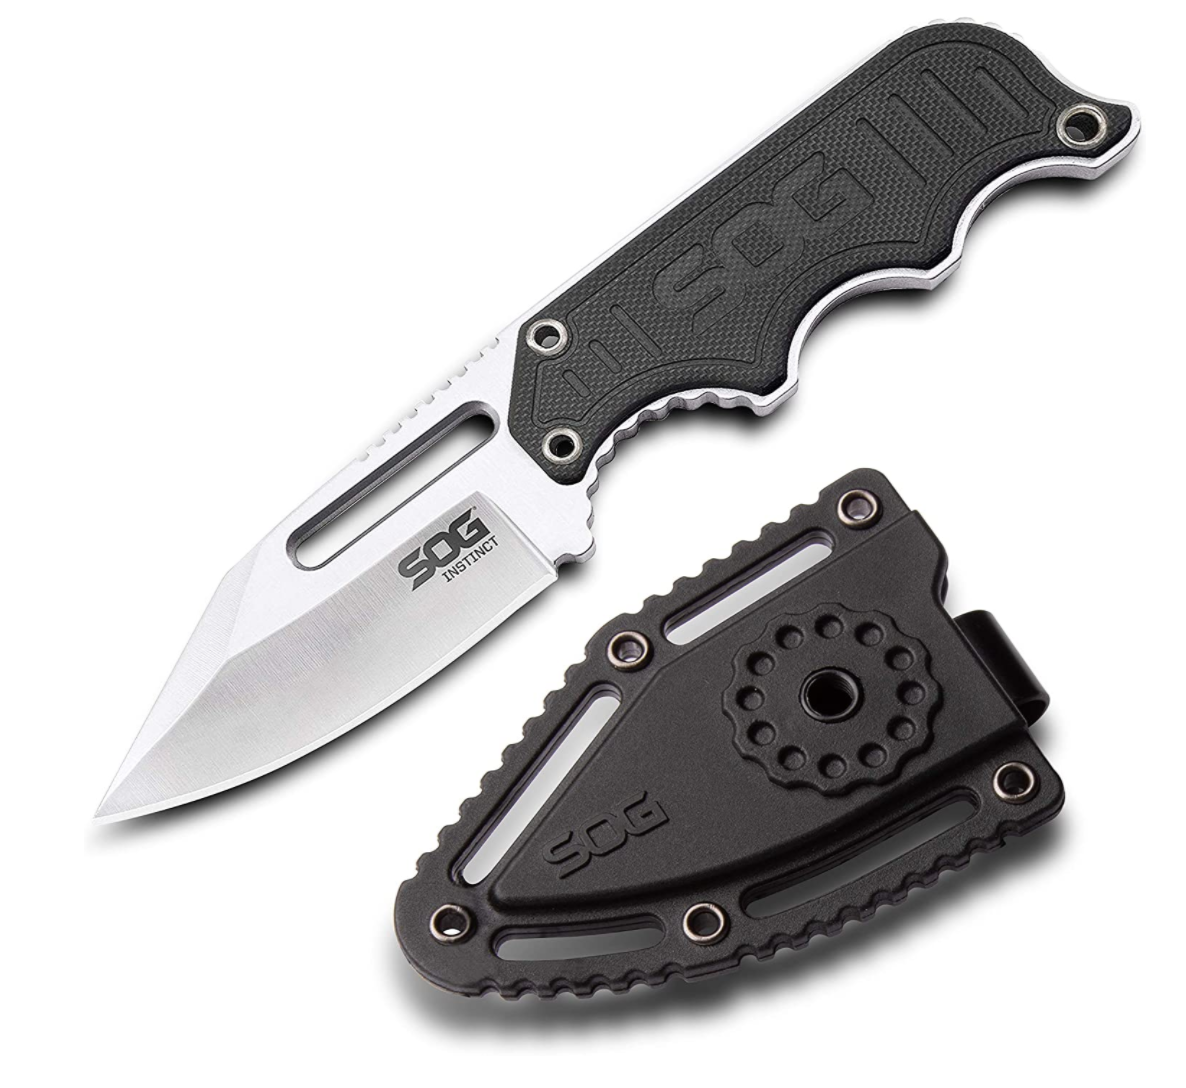 SOG Instinct review: a mini but mighty fixed blade knife - Task & Purpose